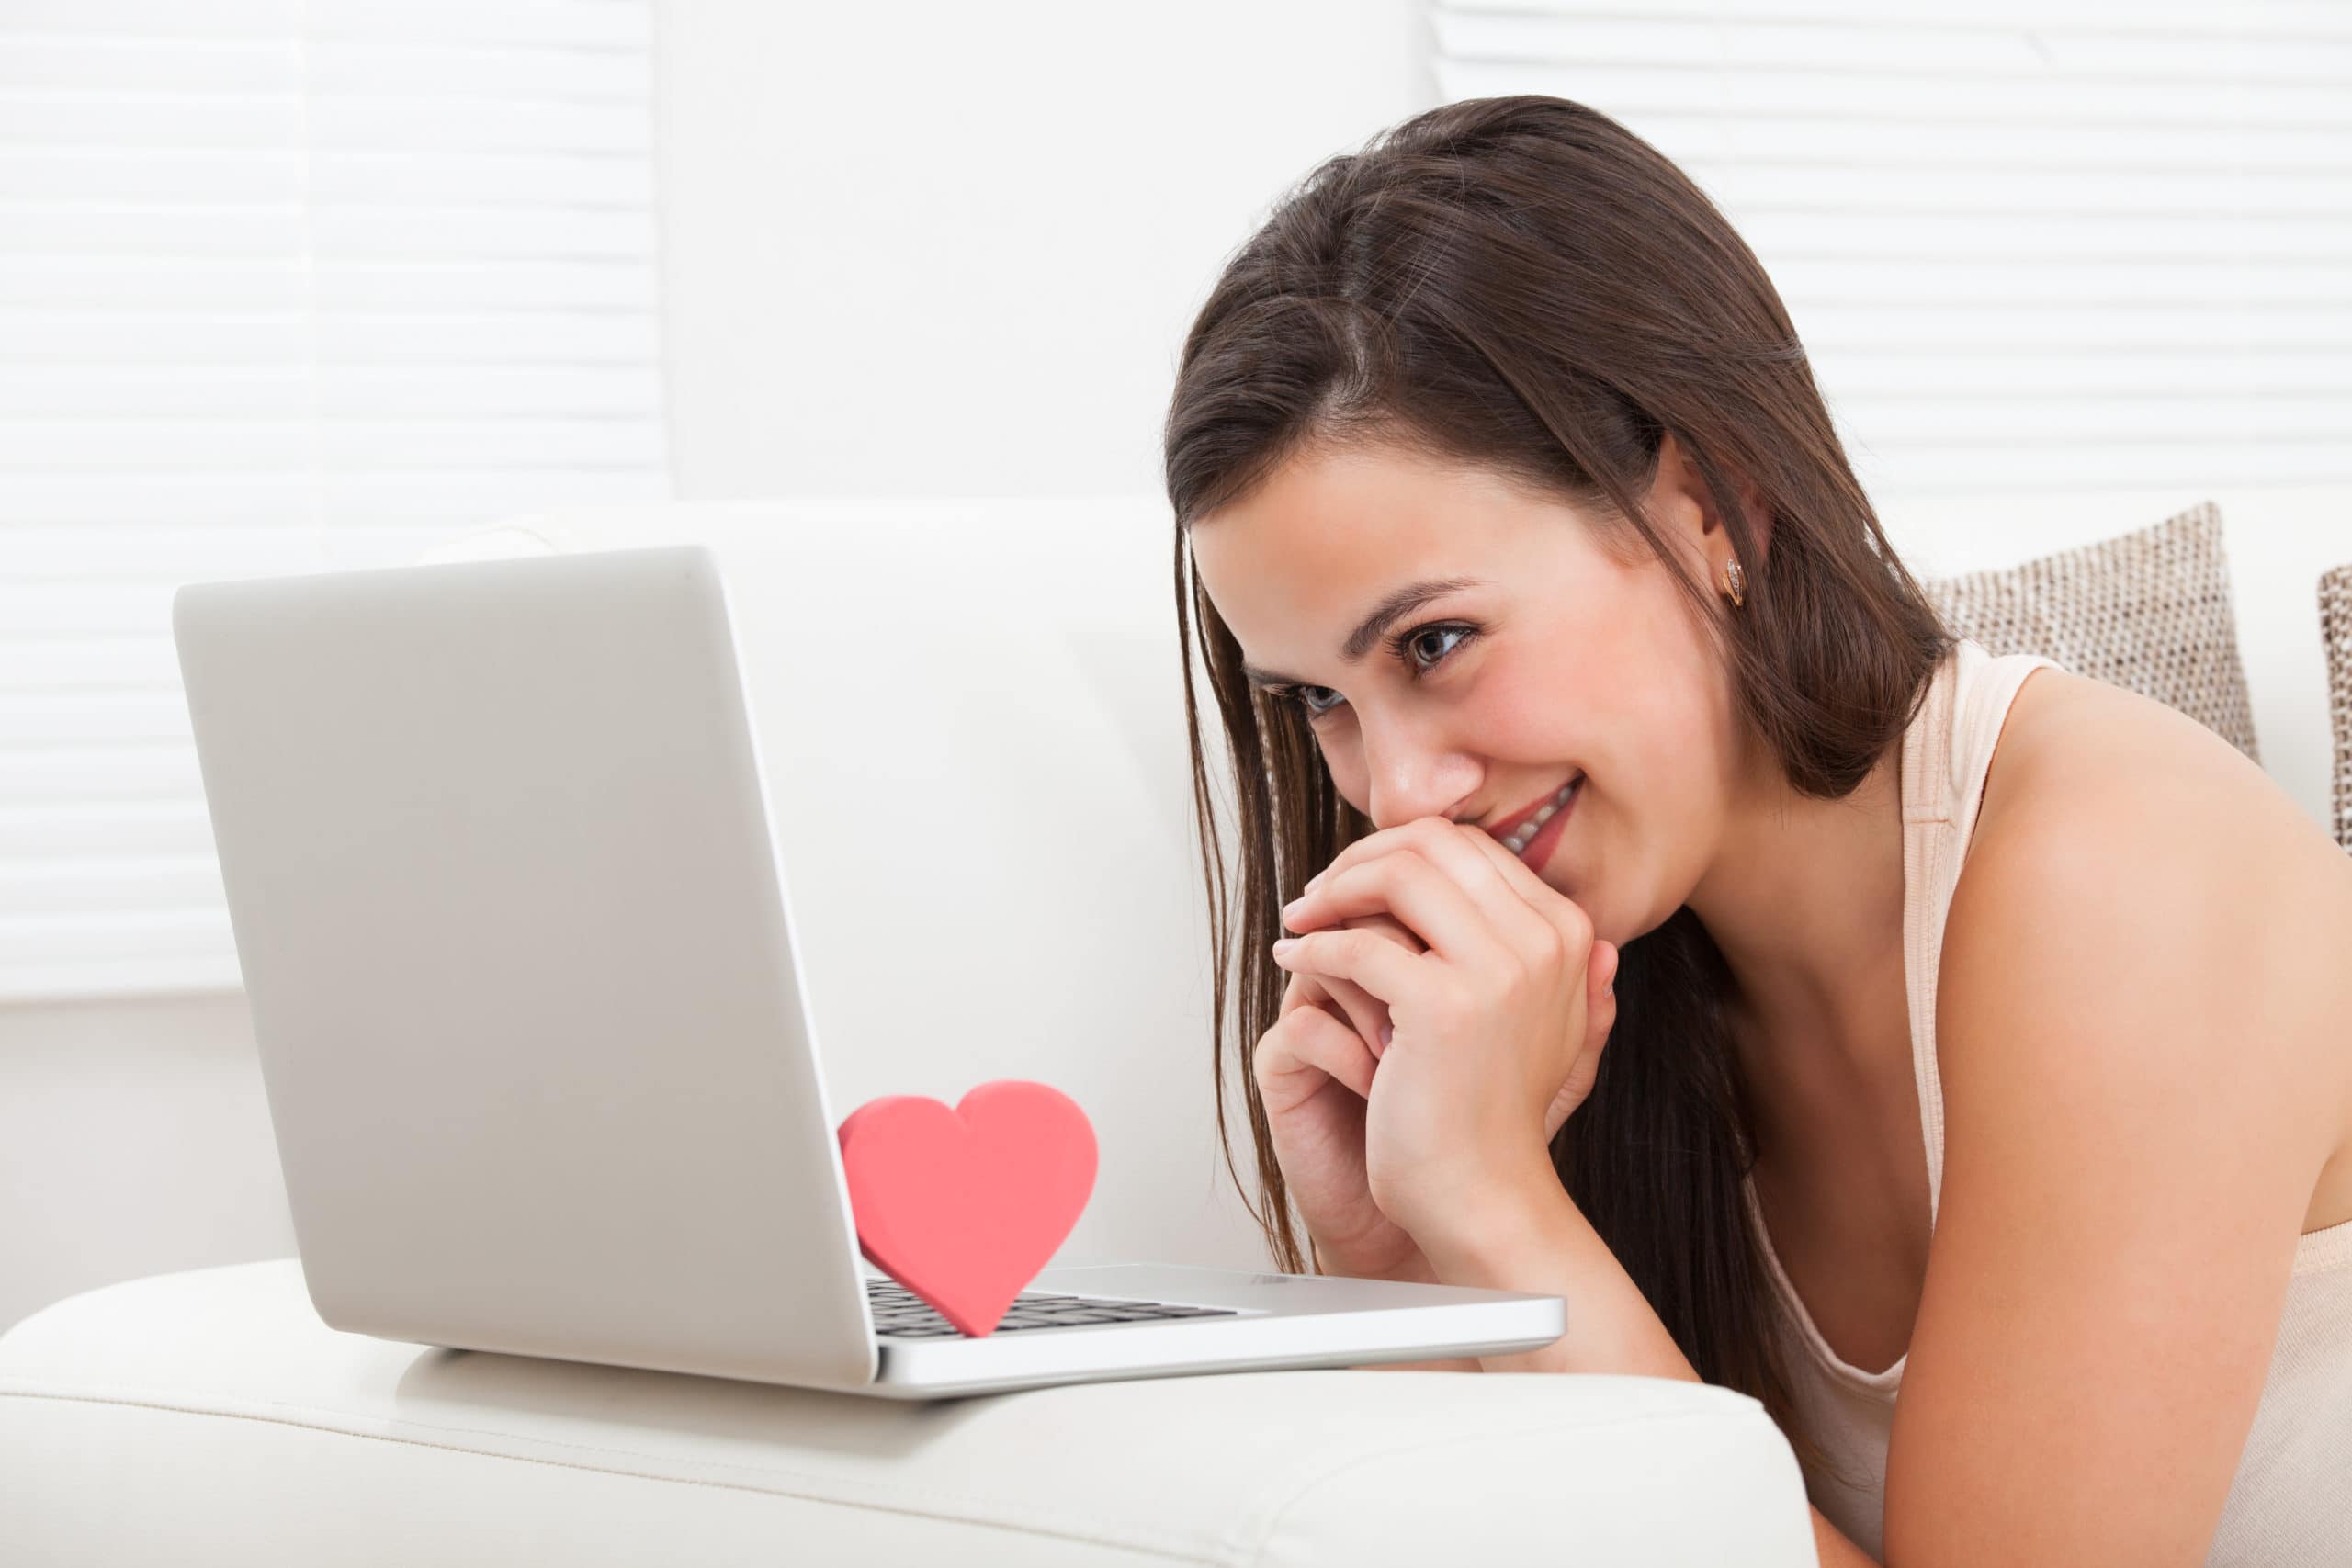 Can Online Dating Ever Lead to a Real Off-line Relationship?